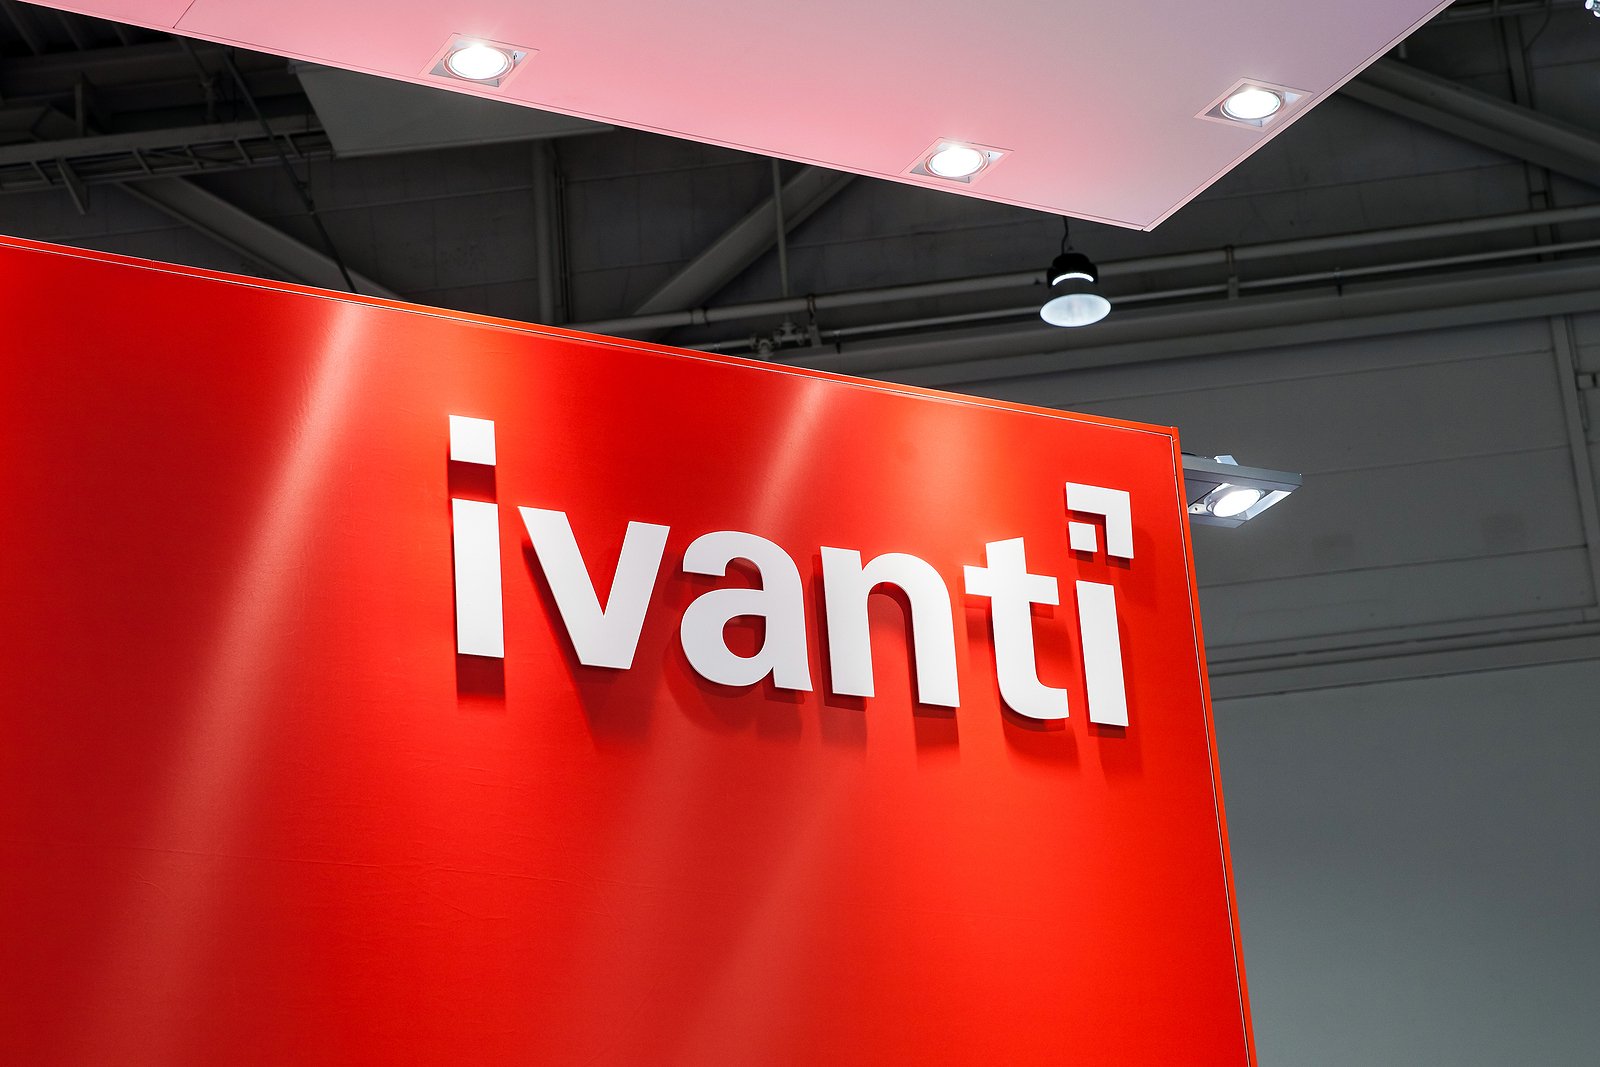 Second Ivanti EPMM Zero-Day Vulnerability Exploited in Targeted Attacks – Source: www.securityweek.com